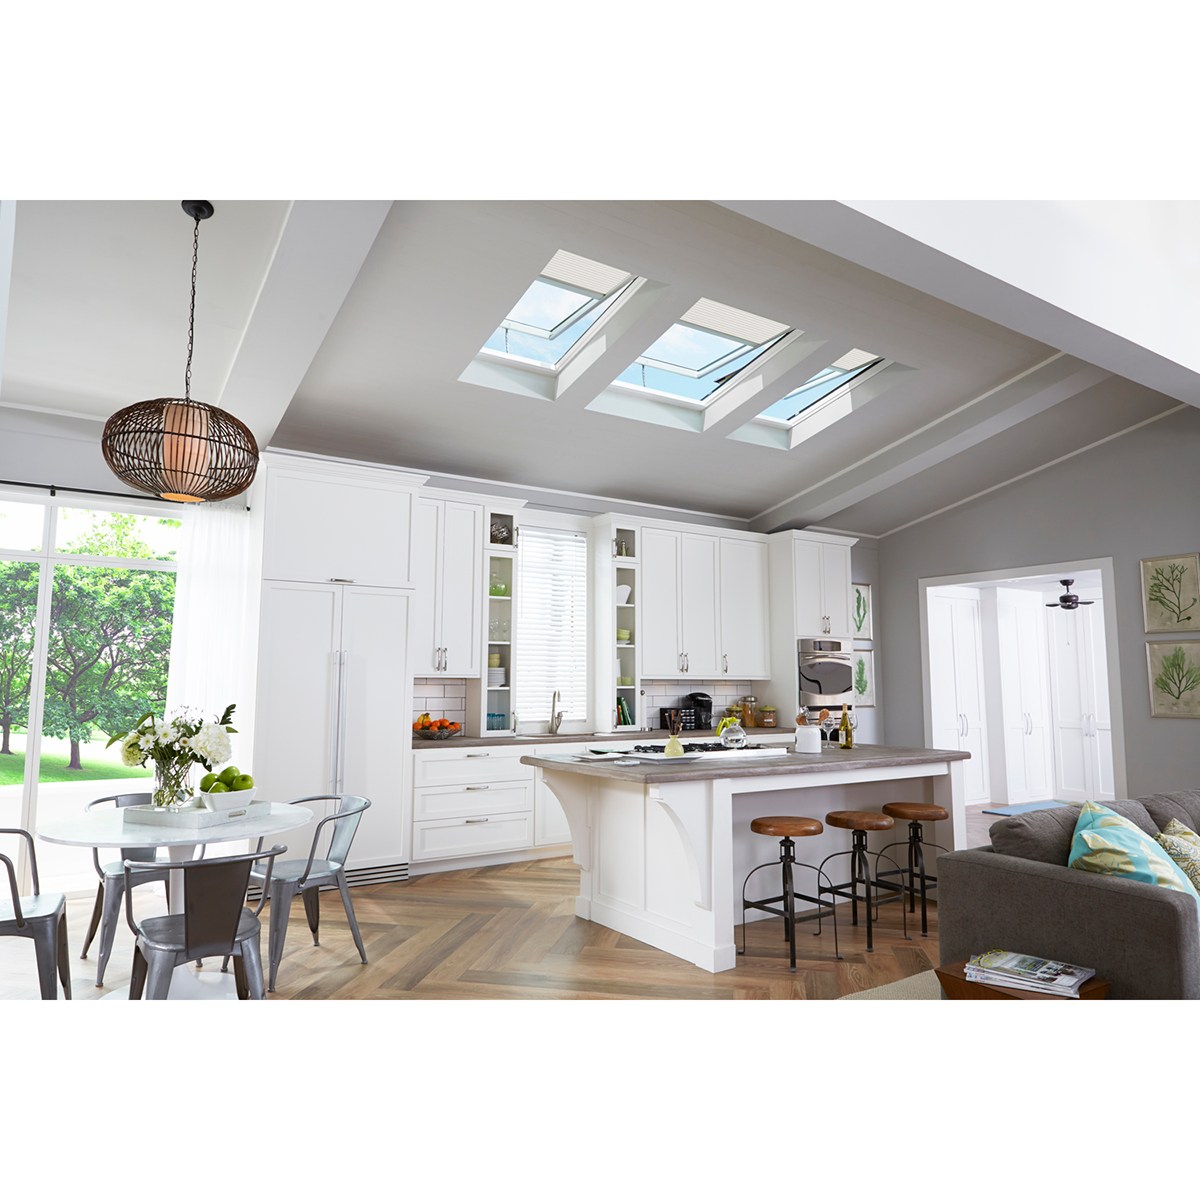 Solar Powered Curb-Mount Skylight with Laminated Low-E3 Glass - 22-1/2 in. x 34-1/2 in. - VCS 2234